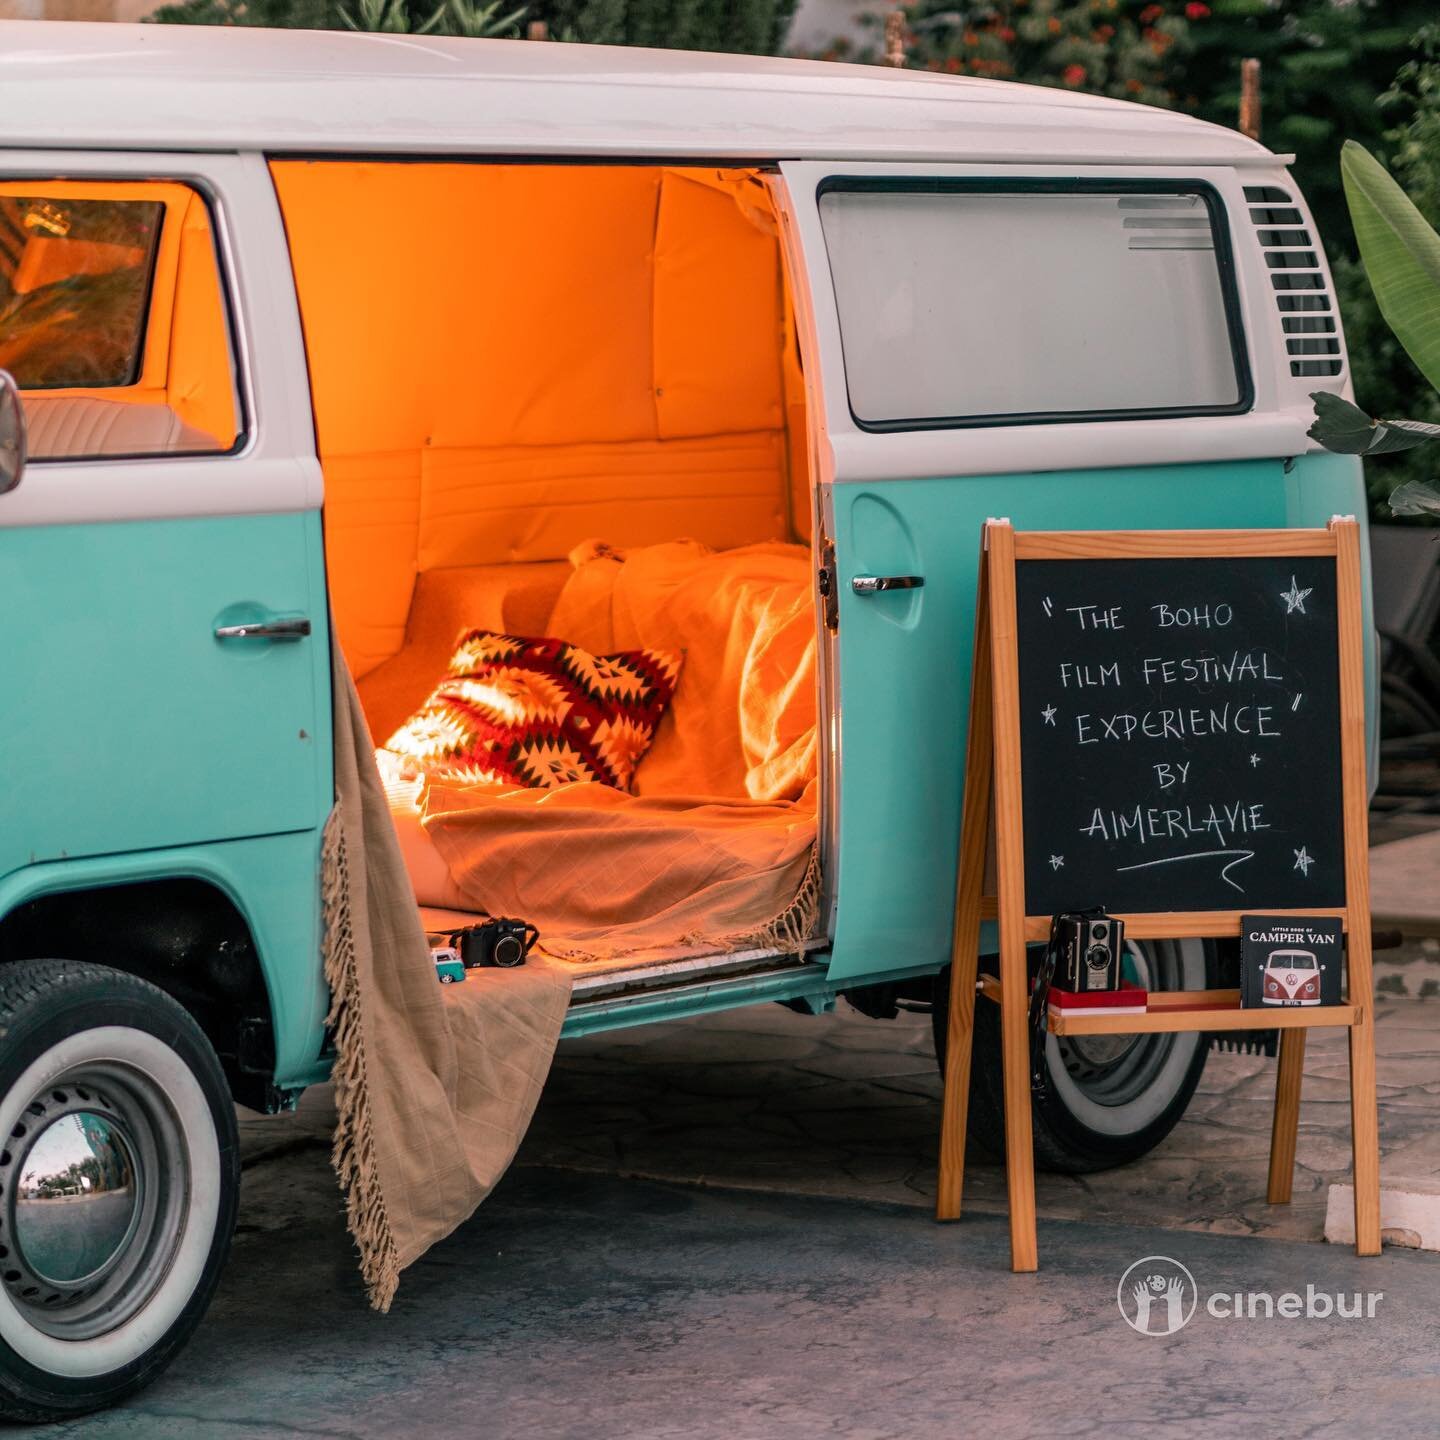 Can you tell we got excited by the &ldquo;Traveling Cinema&rdquo; camper-van concept? 🚌

We are so inspired by these creative ways to turn these magical moments into experiences that last on the road. 

If you&rsquo;re into these boho vibes, then yo